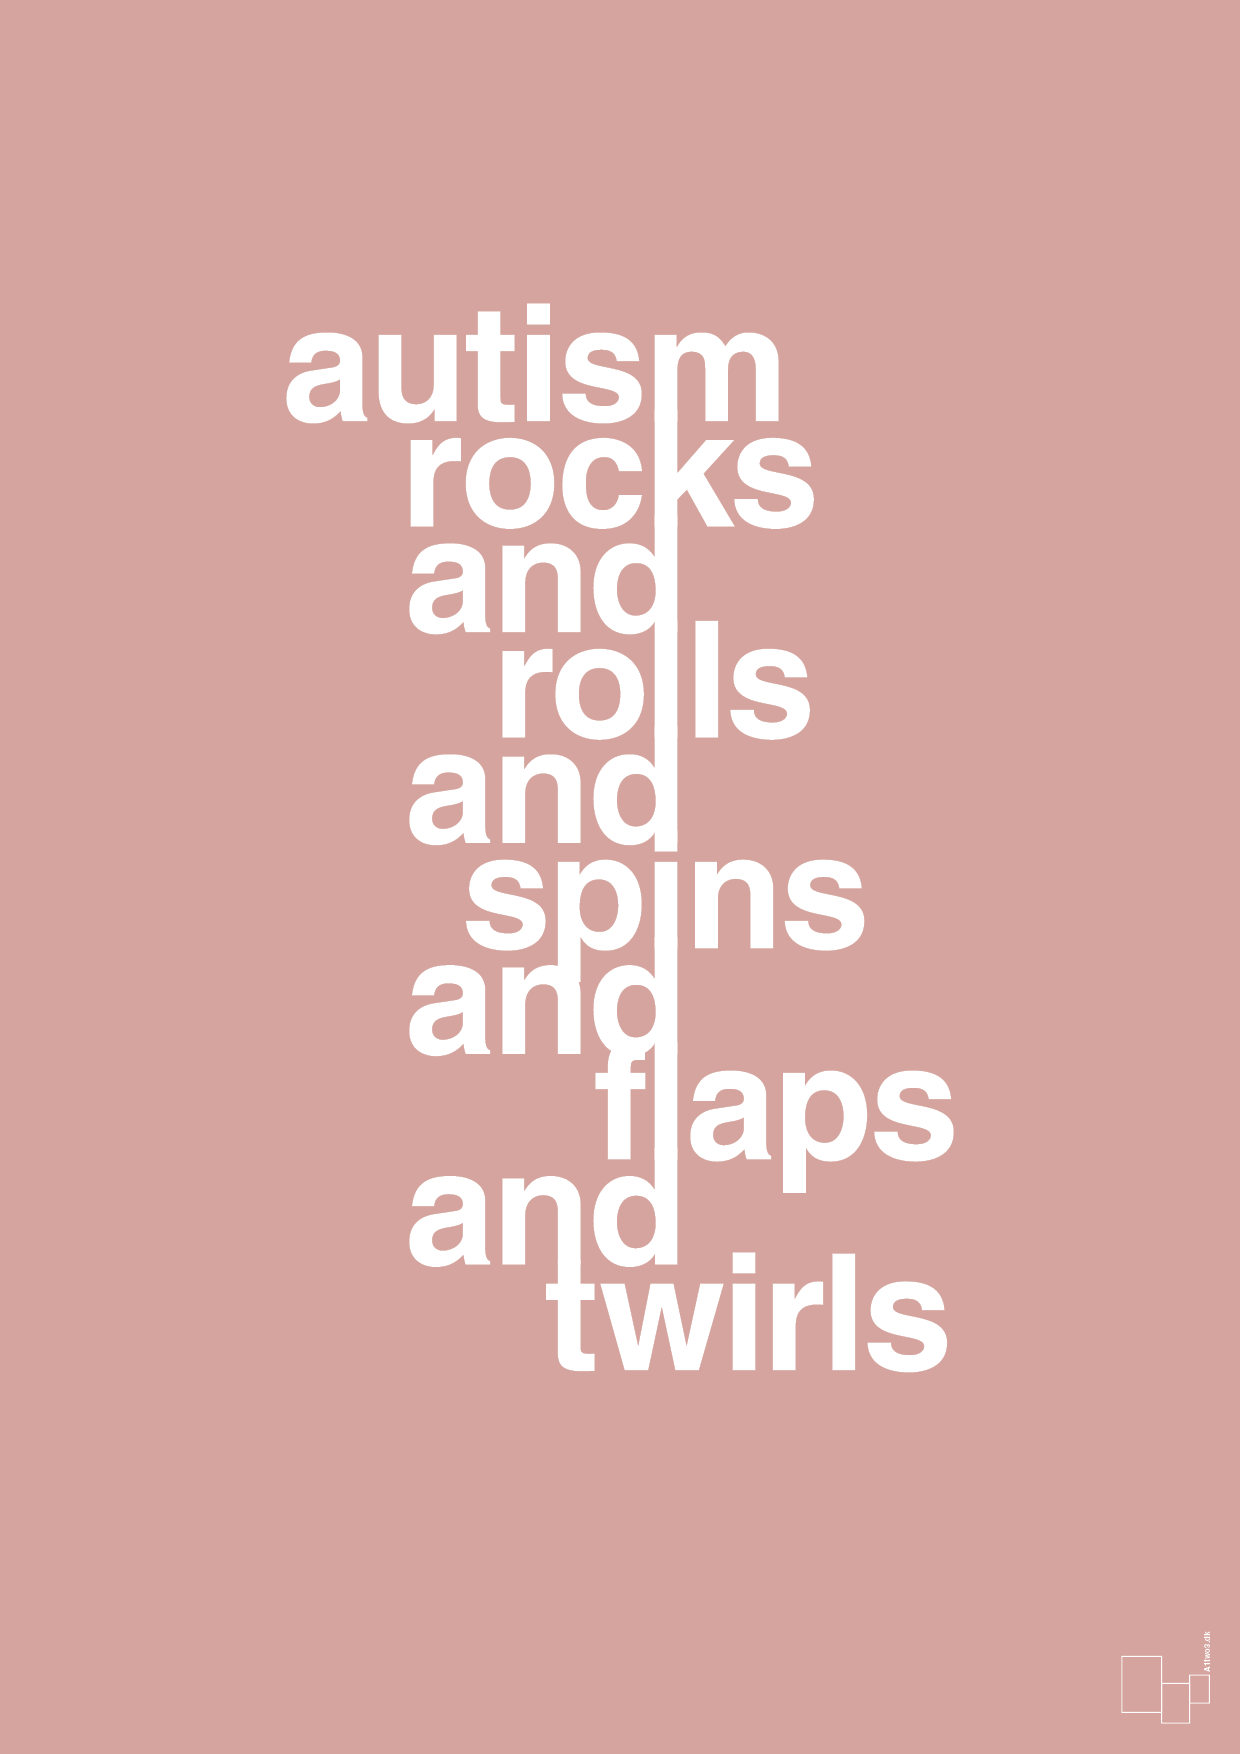 autism rocks and rolls and spins and flaps and twirls - Plakat med Samfund i Bubble Shell